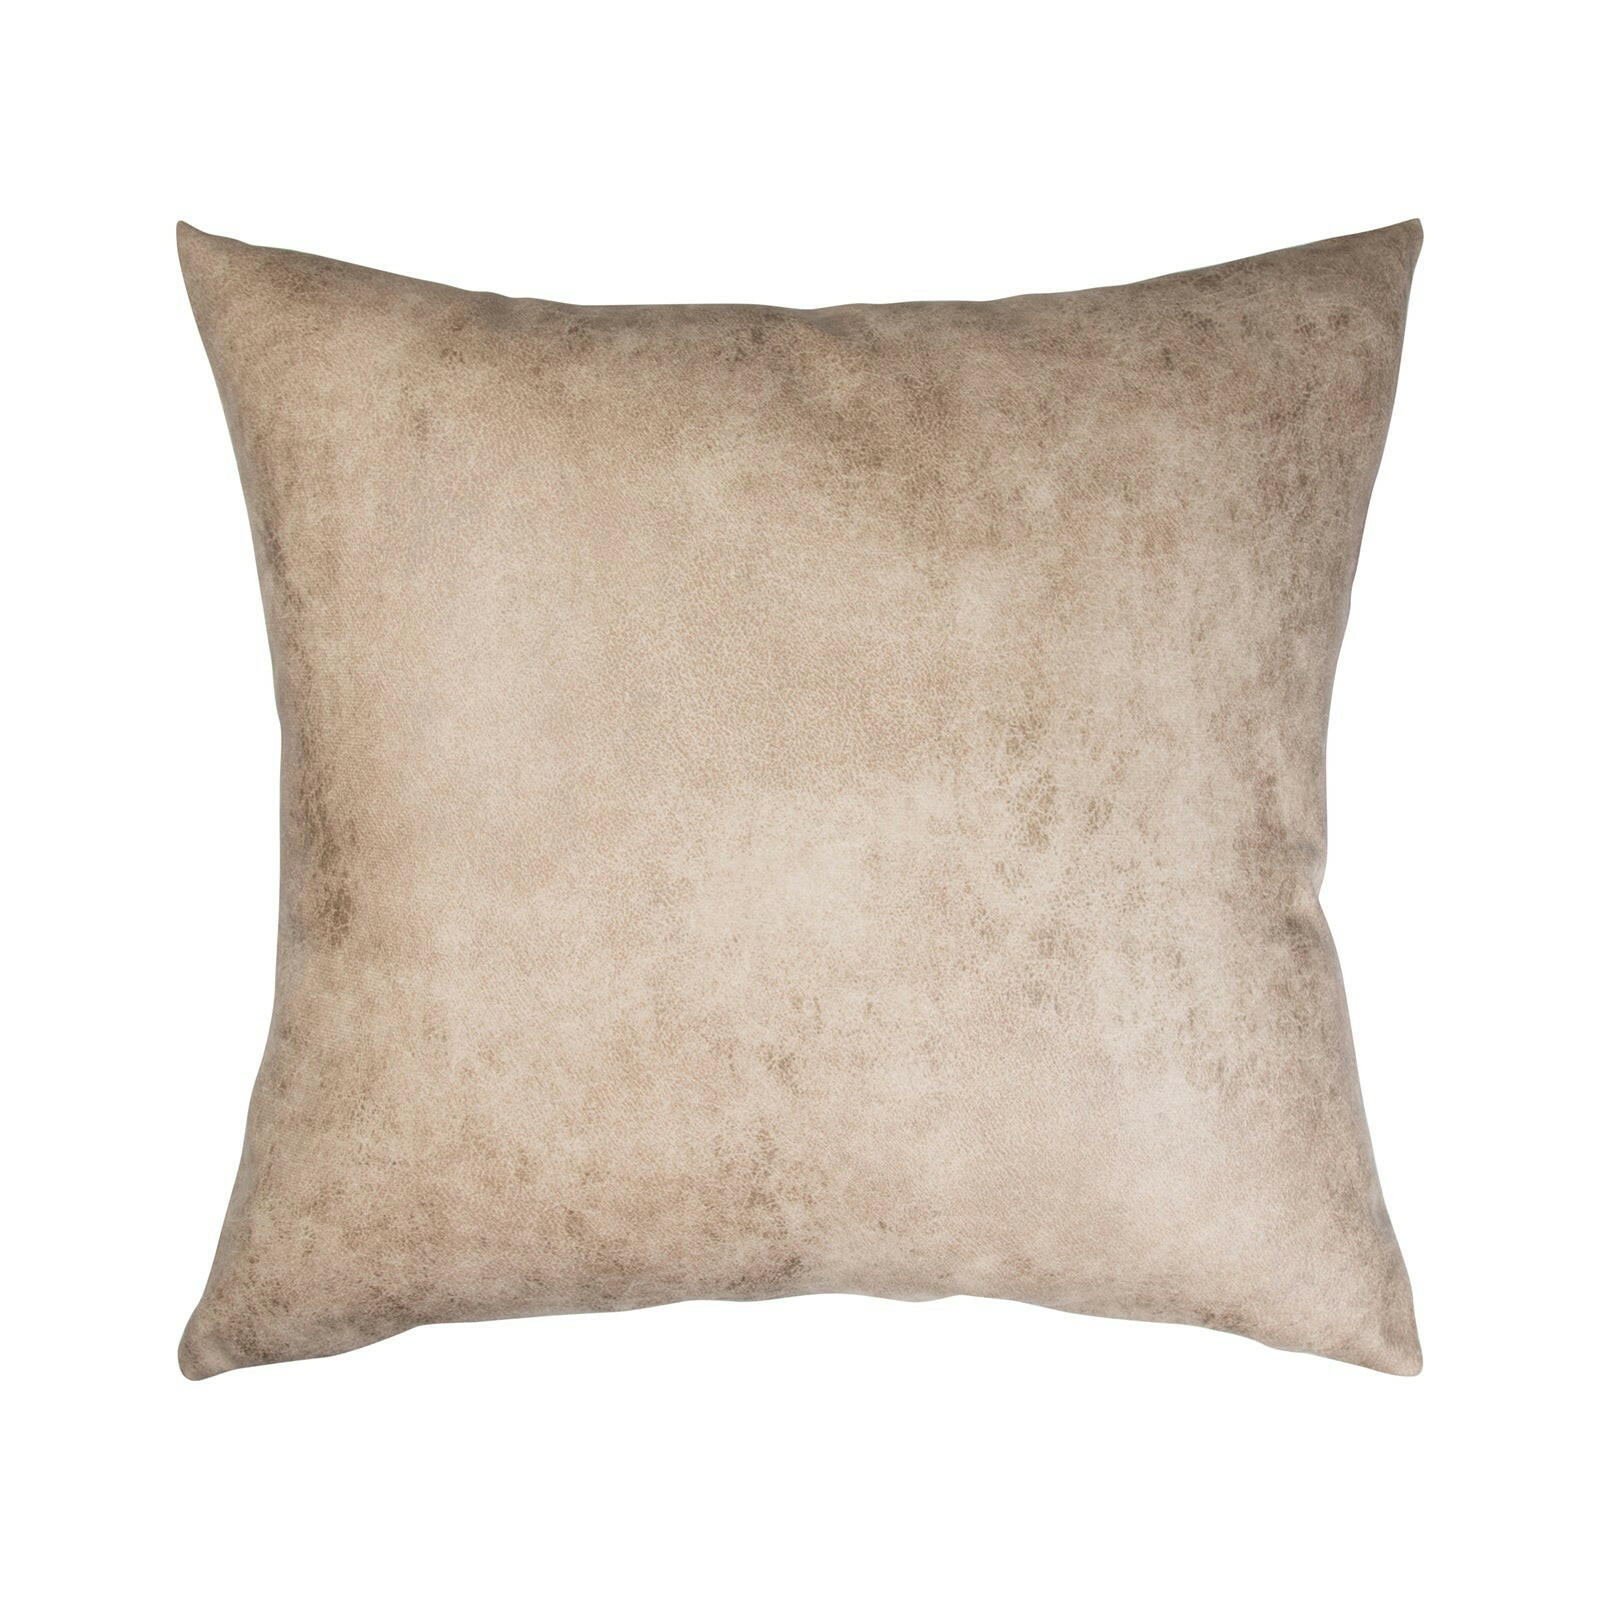 Brown Vegan Leather Sublimation Pillow Cases - 4 Pack.